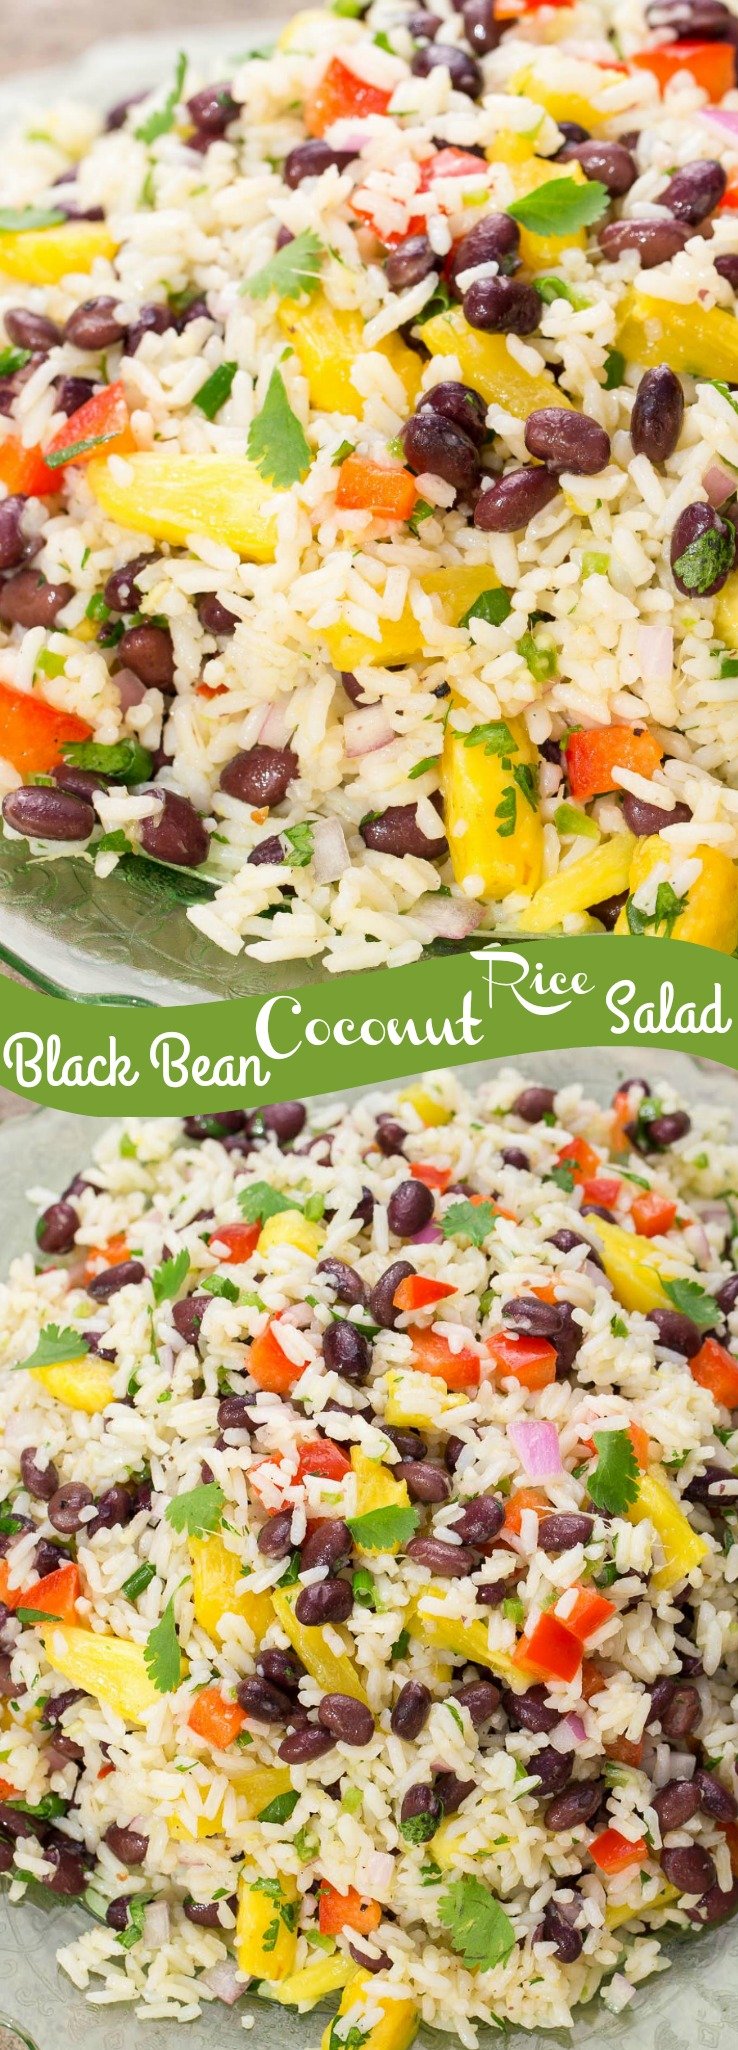 Black Bean Coconut Rice Salad is a colorful, zesty salad with a delicious combination of ingredients like coconut-infused rice, beans, bell peppers, red onion, and pineapple.   via @artandthekitch